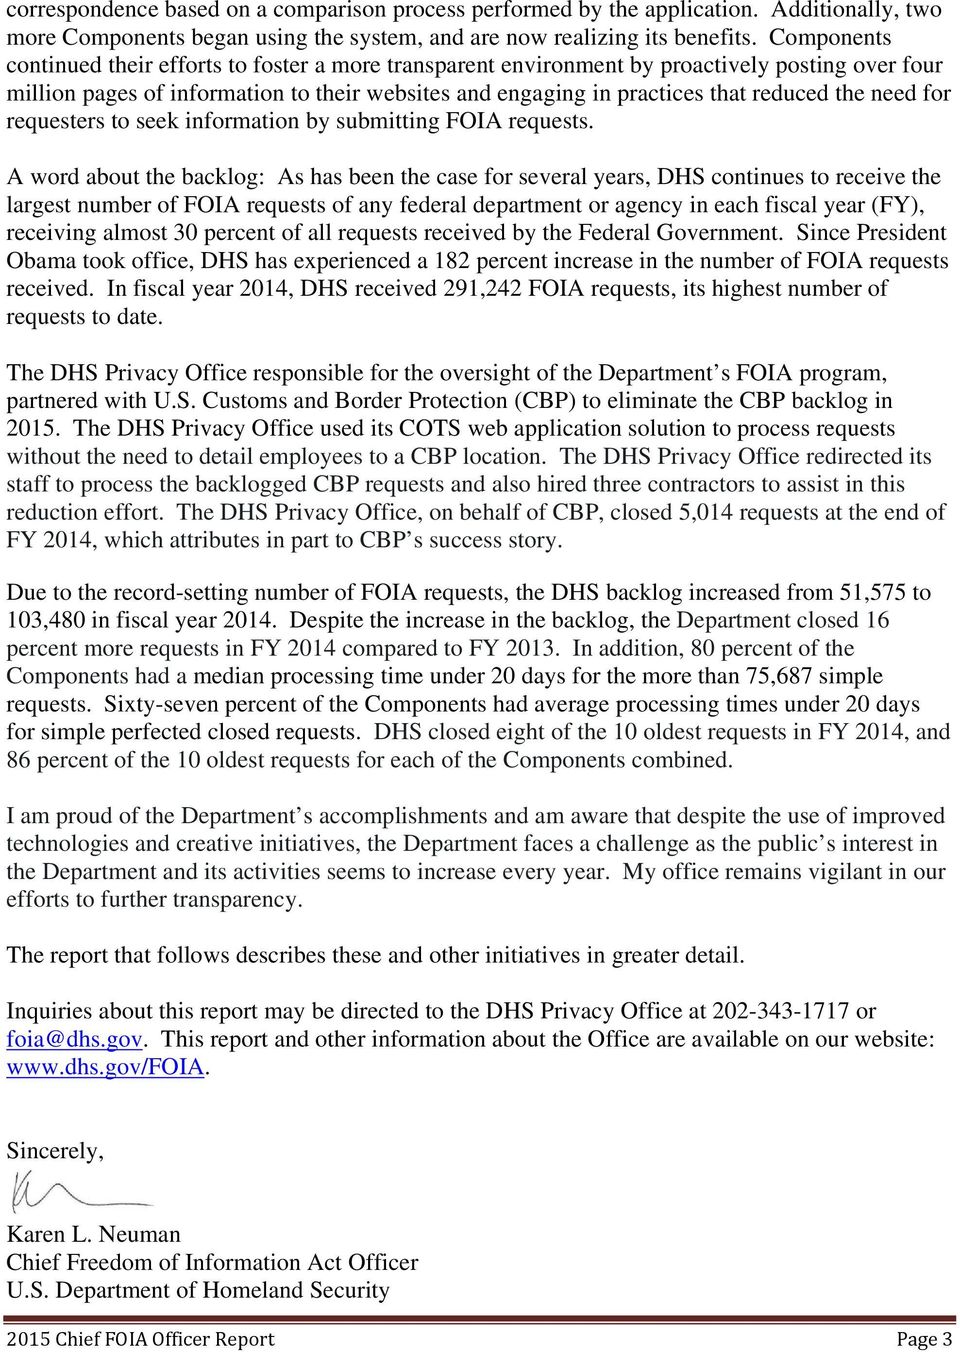 need for requesters to seek information by submitting FOIA requests.